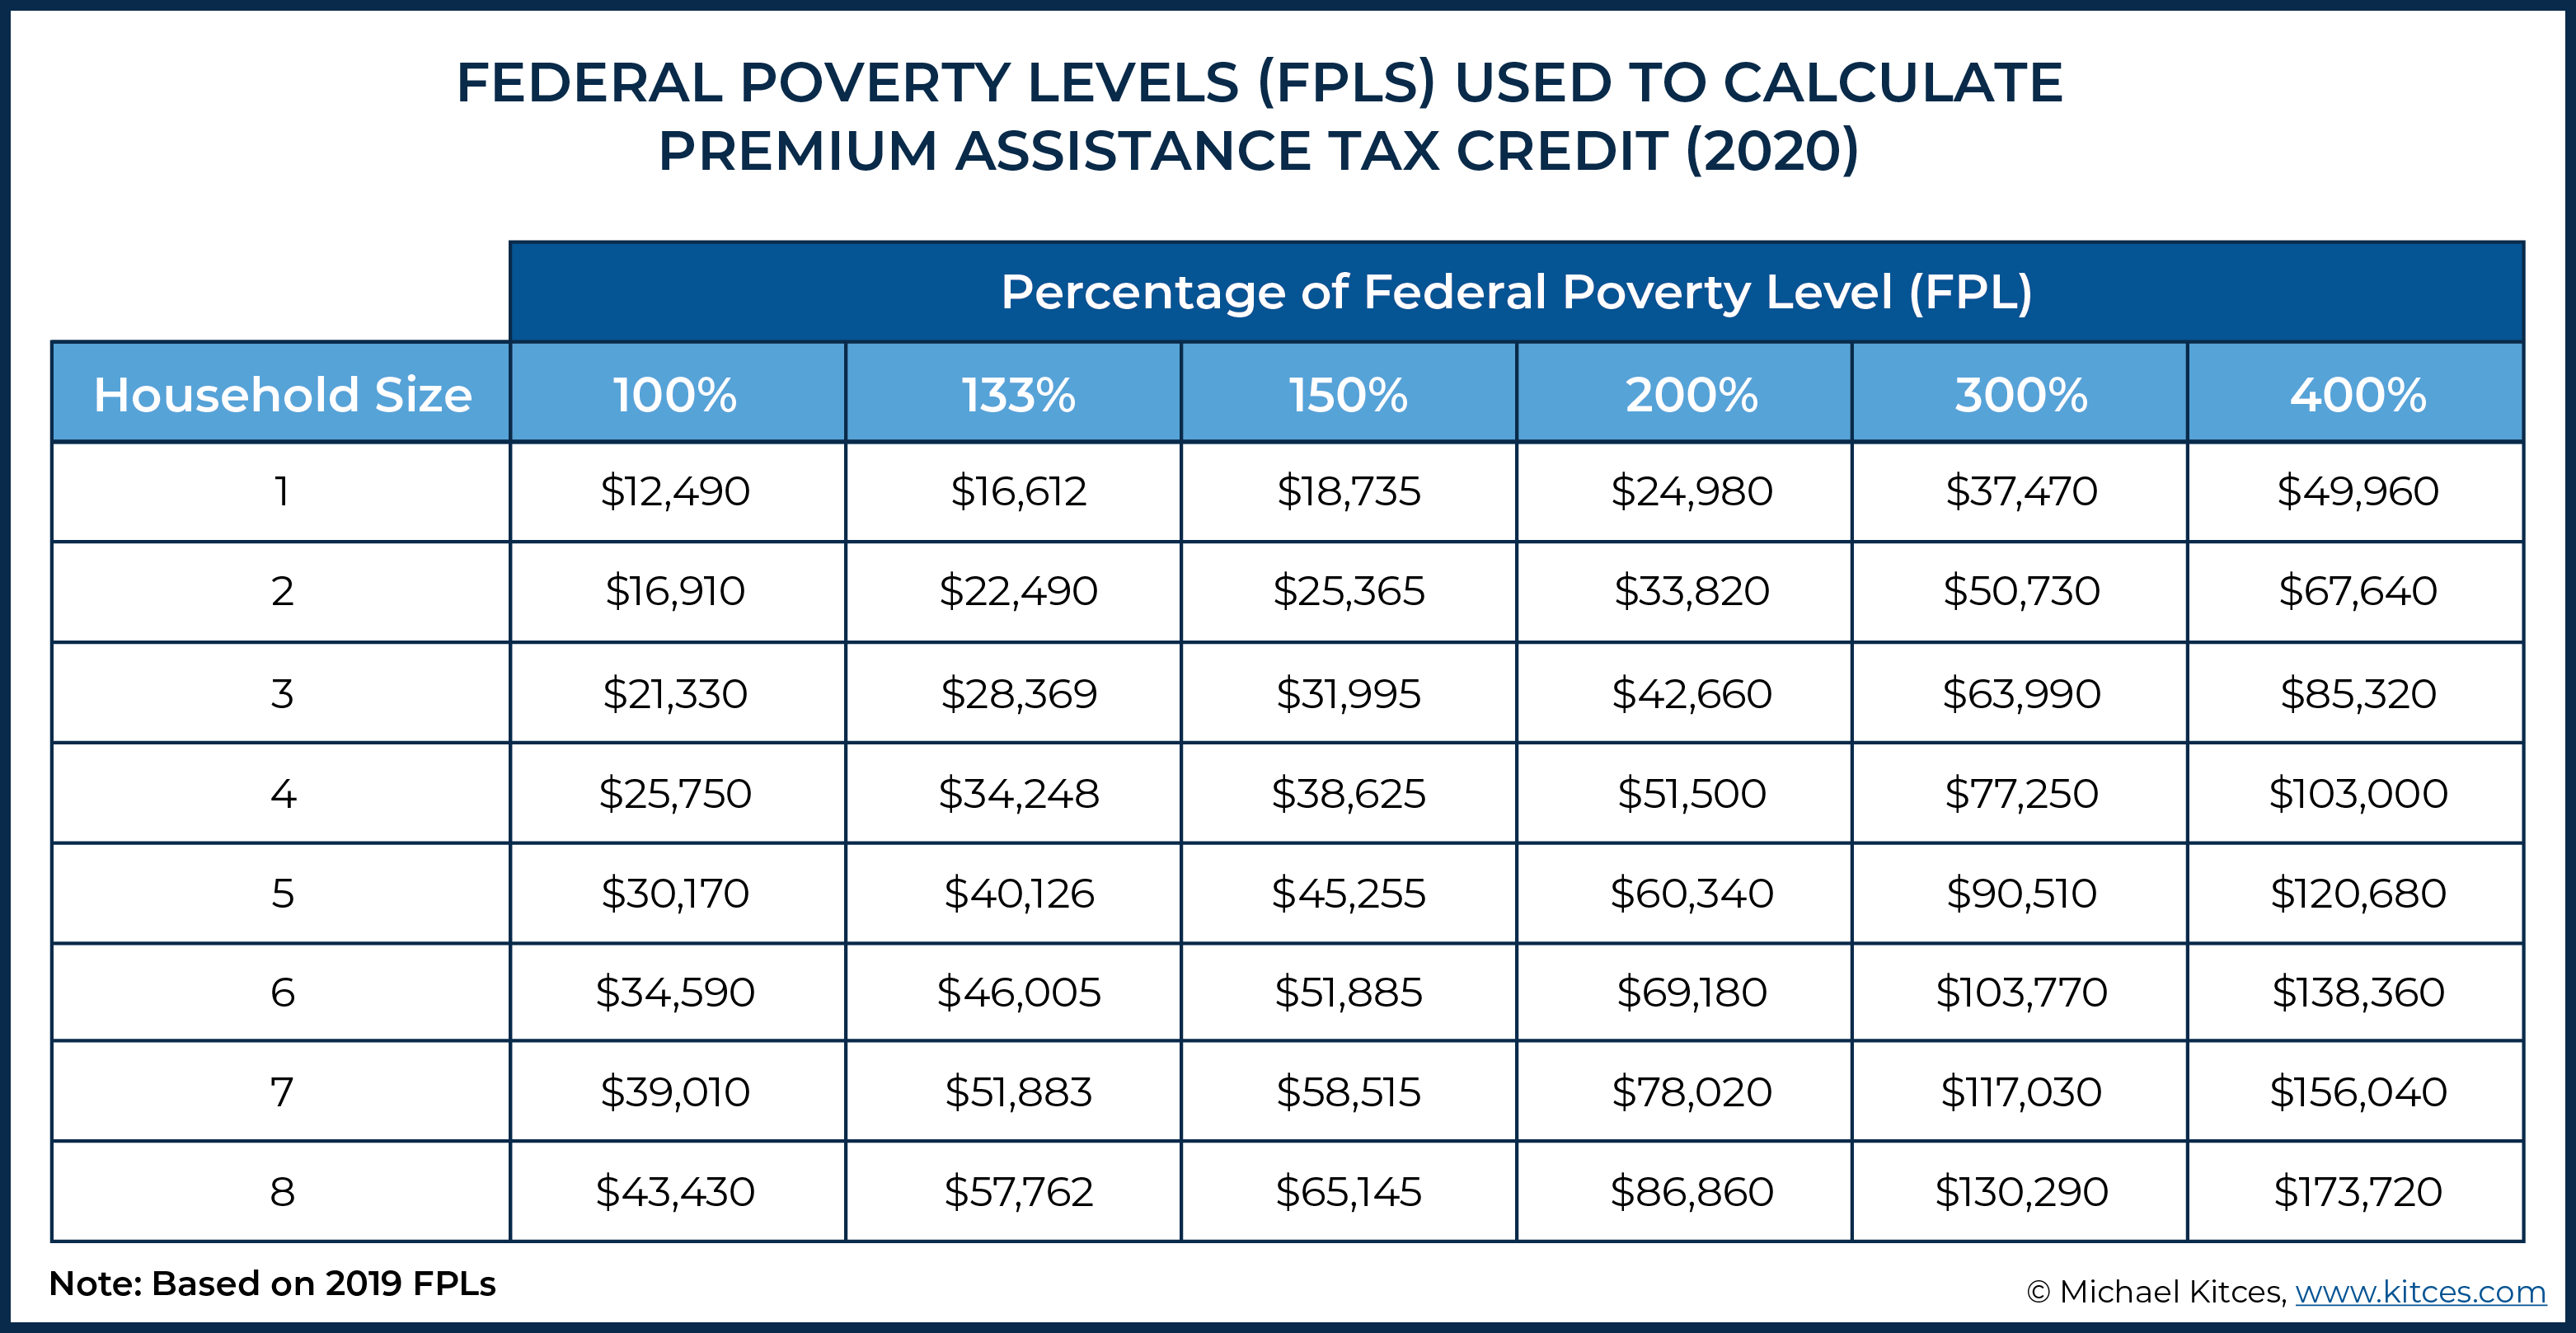 How To Calculate 300 Of The Federal Poverty Level Reverasite